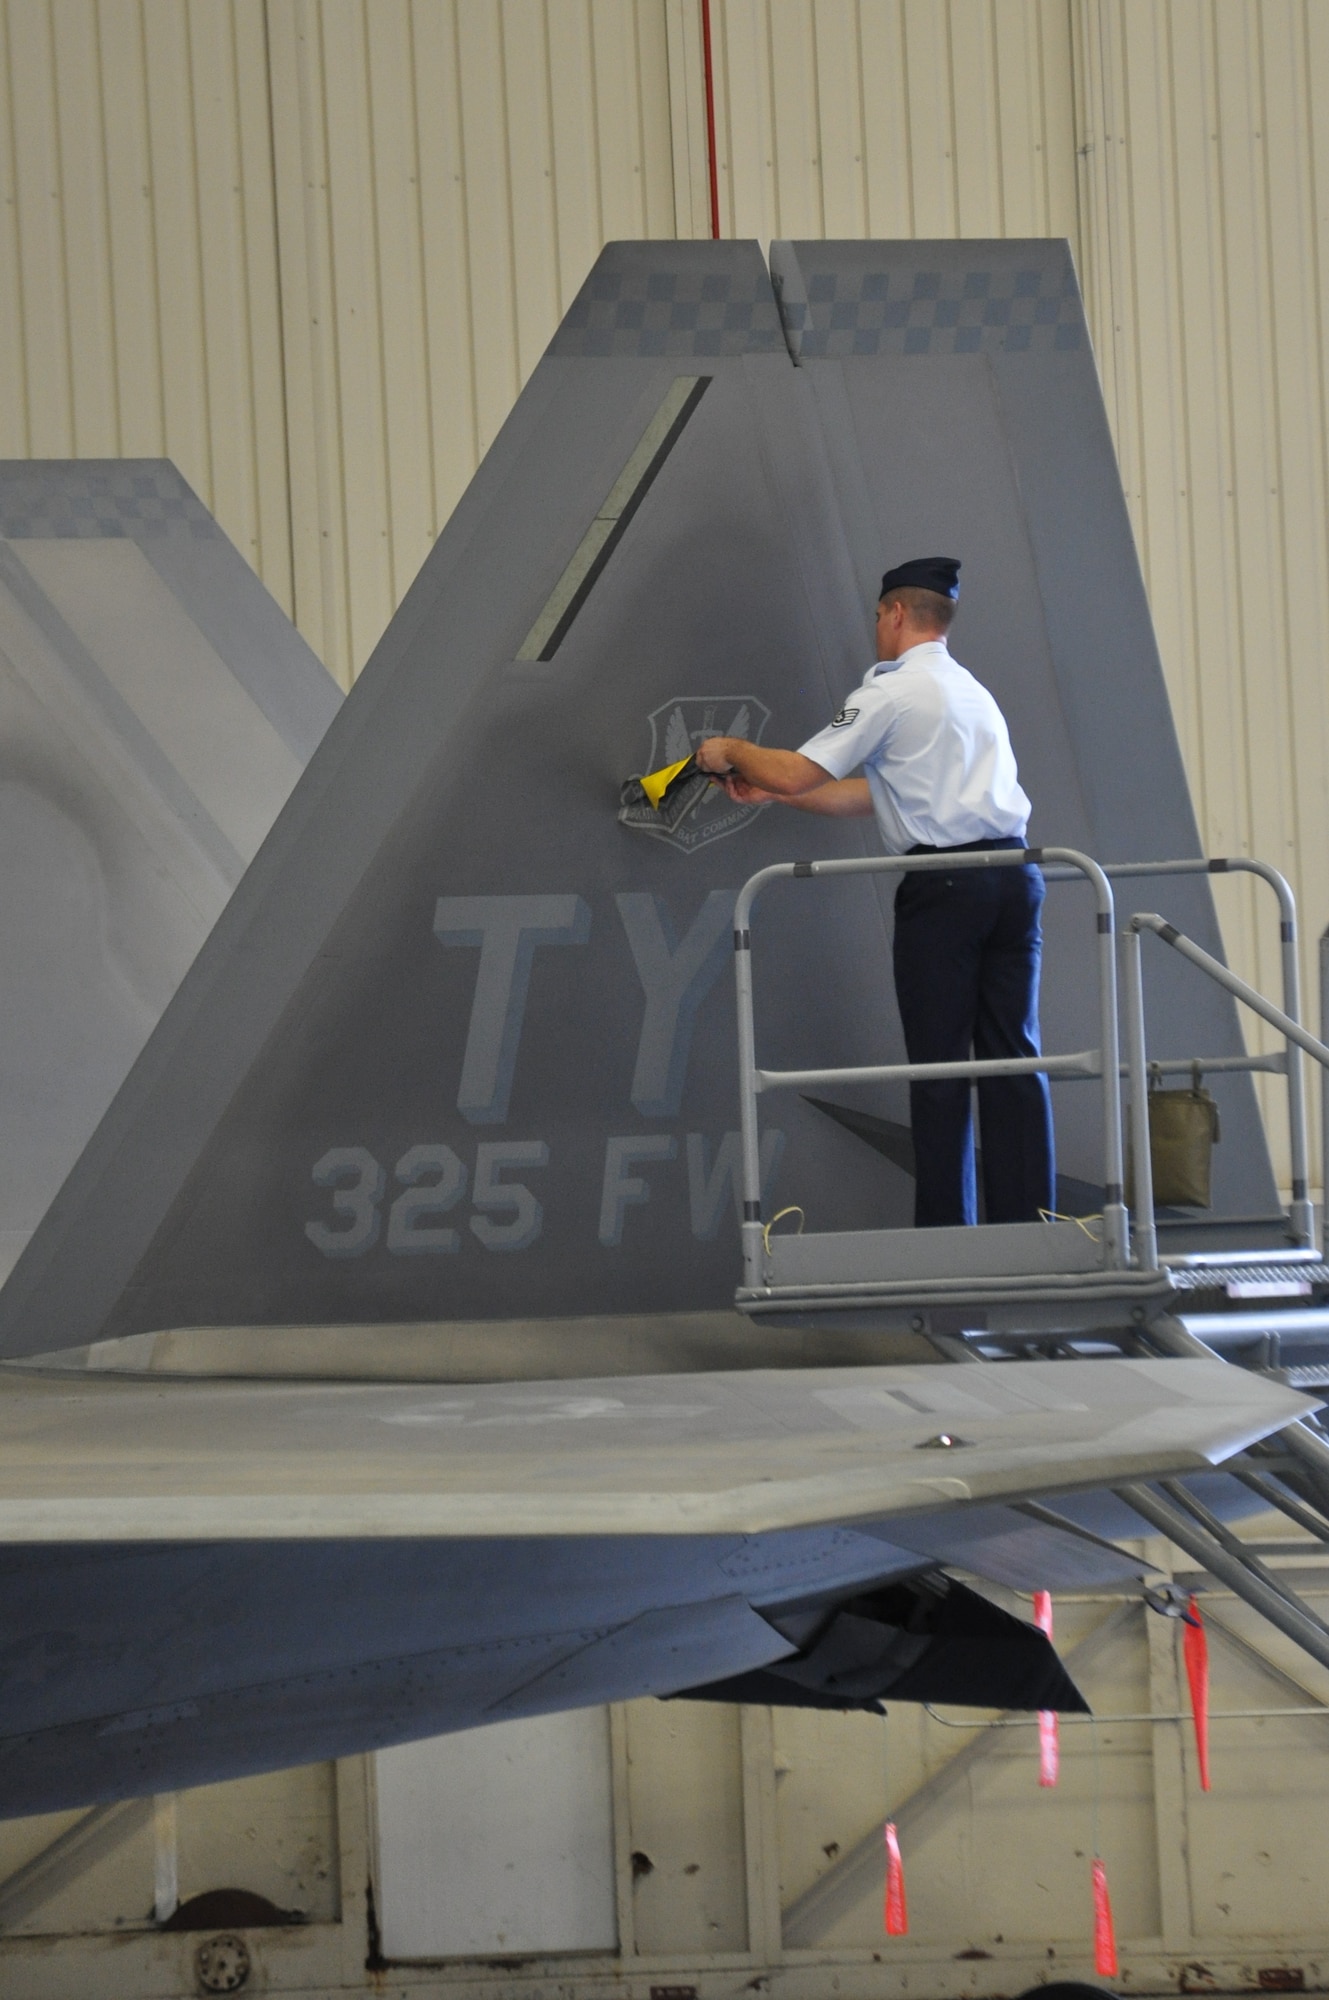 Staff Sgt. Joshua Bard, 325th Aircraft Maintenance Squadron dedicated crew chief, removes the Air Education and Training Command patch from an F-22 Raptor tail, revealing the Air Combat Command patch, Oct. 1 in Hangar 1 during the recent reassignment ceremony. (U.S. Air Force photo by Airman 1st Class Christopher Reel)